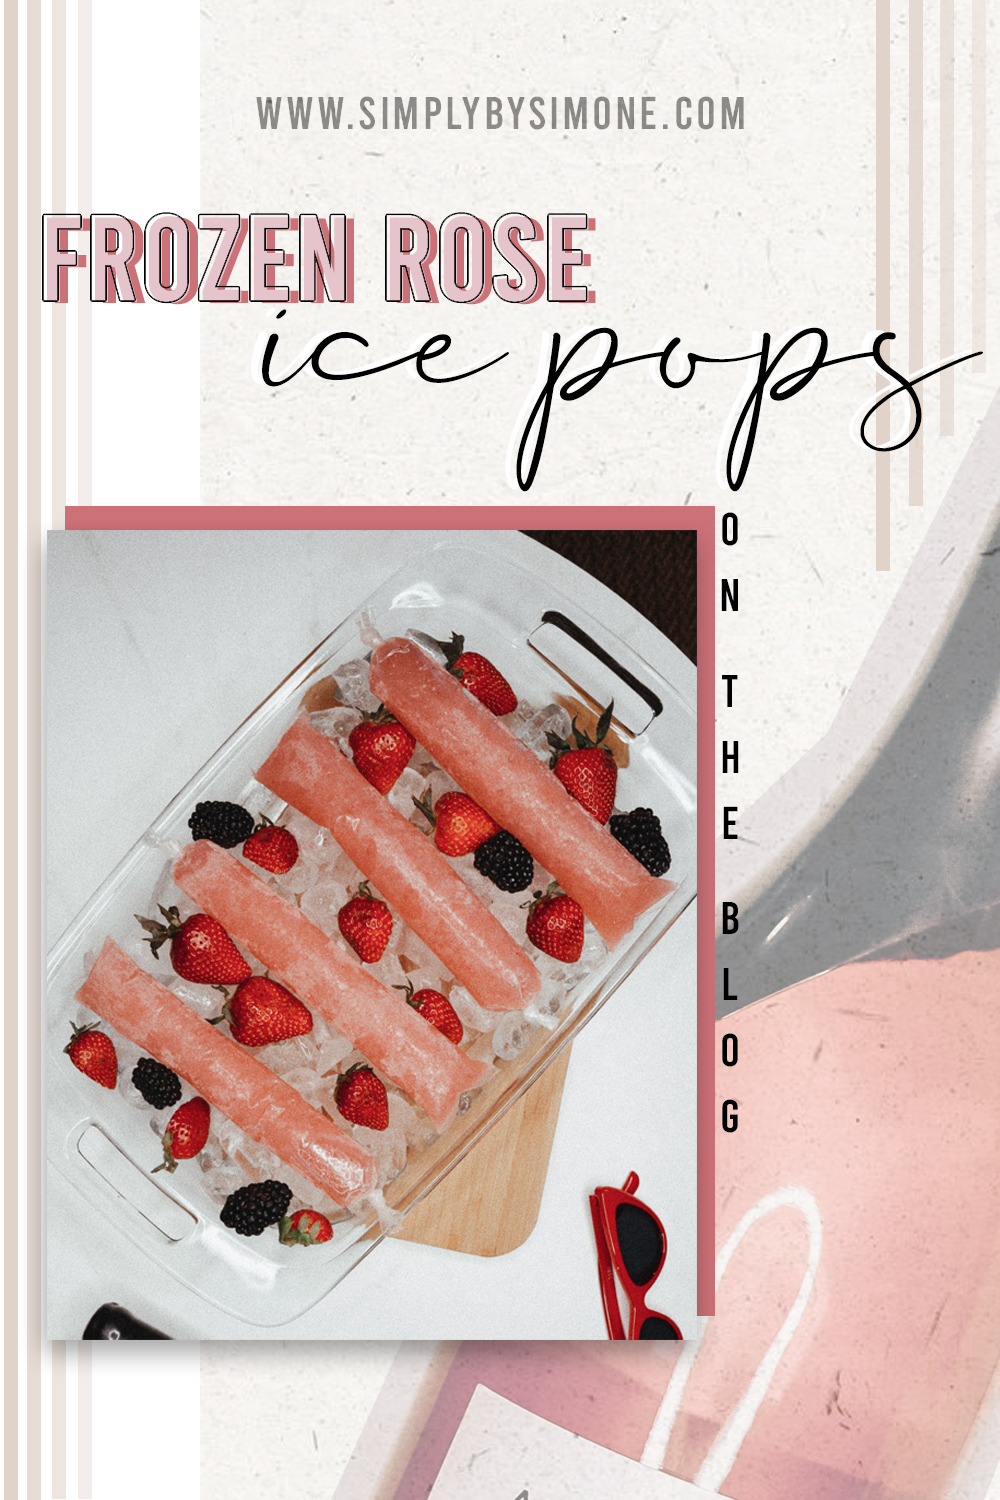 adorada froze ice pops-summertime-alcohol-lifestyle-blogger #rose #froze #icepops #summer #cocktails #diyicepops #diy #recipe #howto #howtomakeicepops #strawberryicepop #icie #treats #dessert 